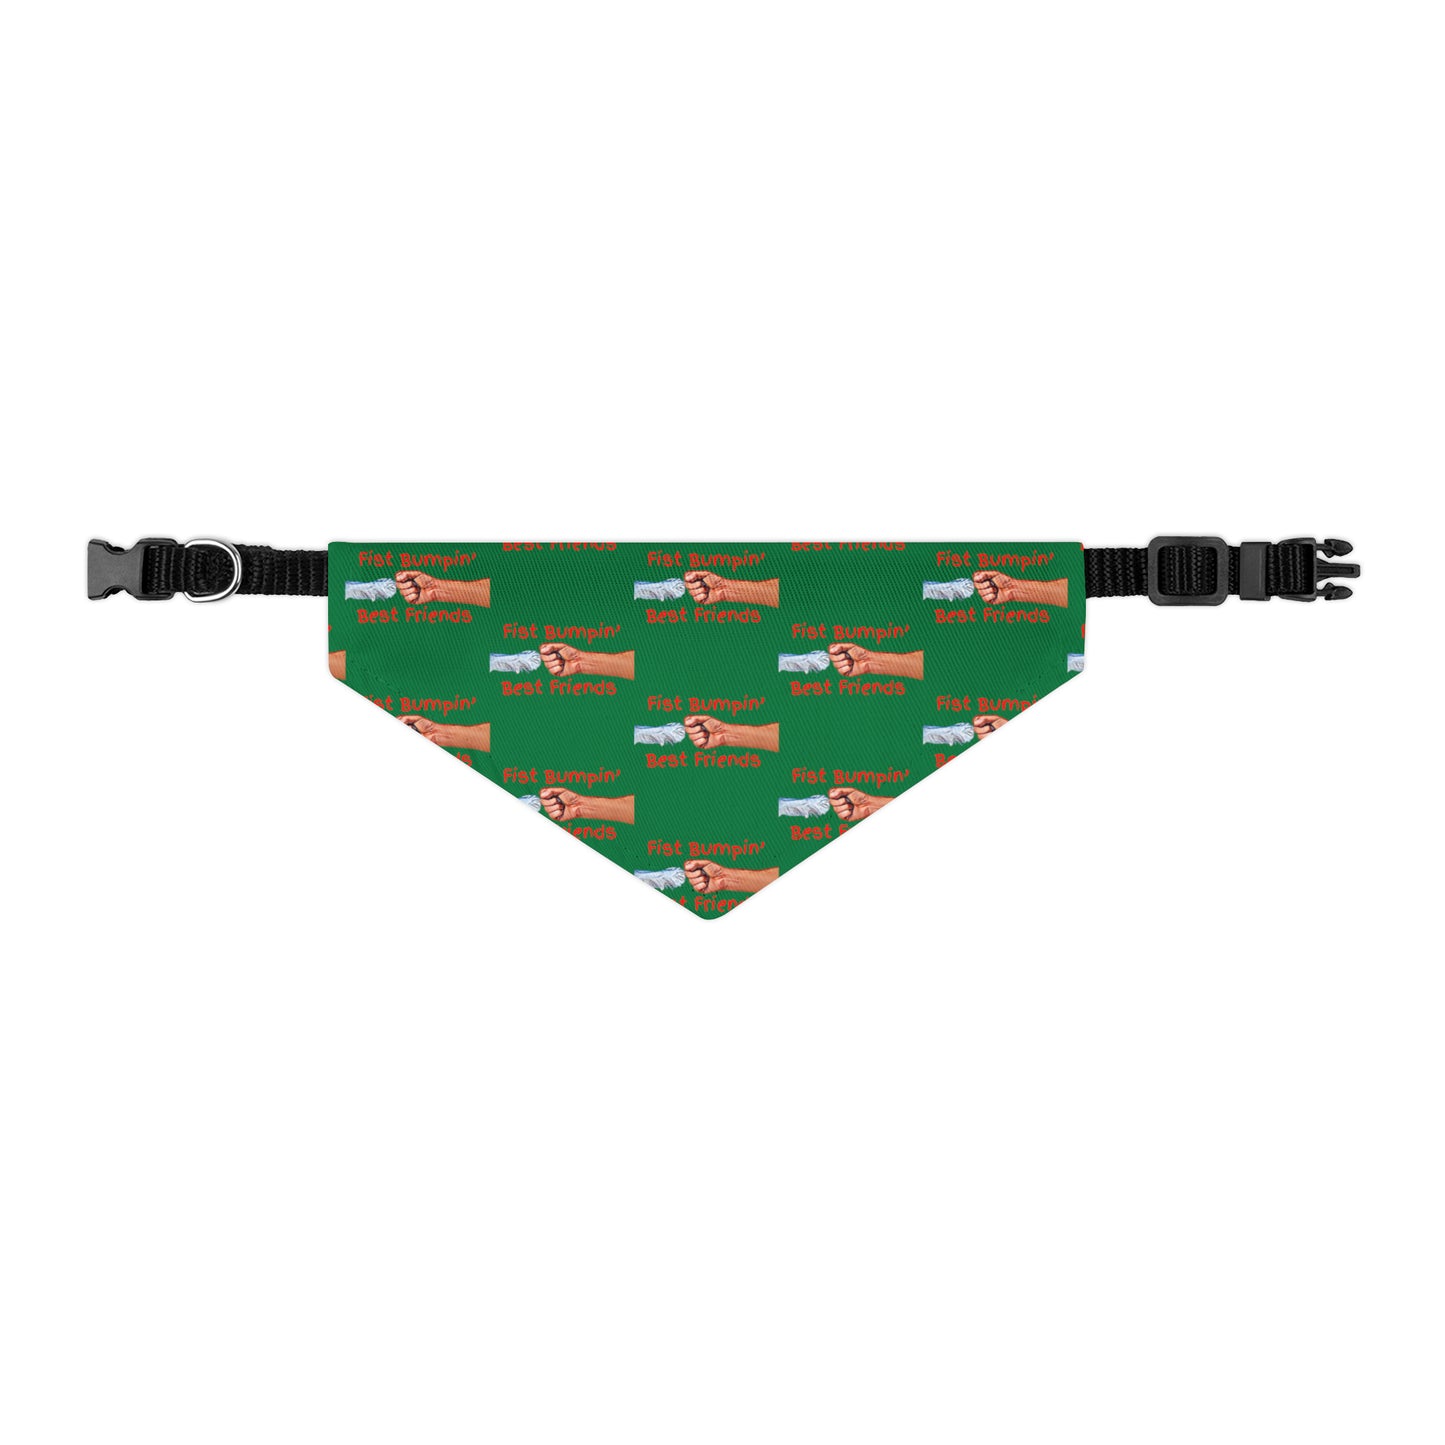 Fist Bumpin’ Best Friends Opie’s Cavalier King Charles Spaniel Pet Bandana Collar Green with KC Red lettering.